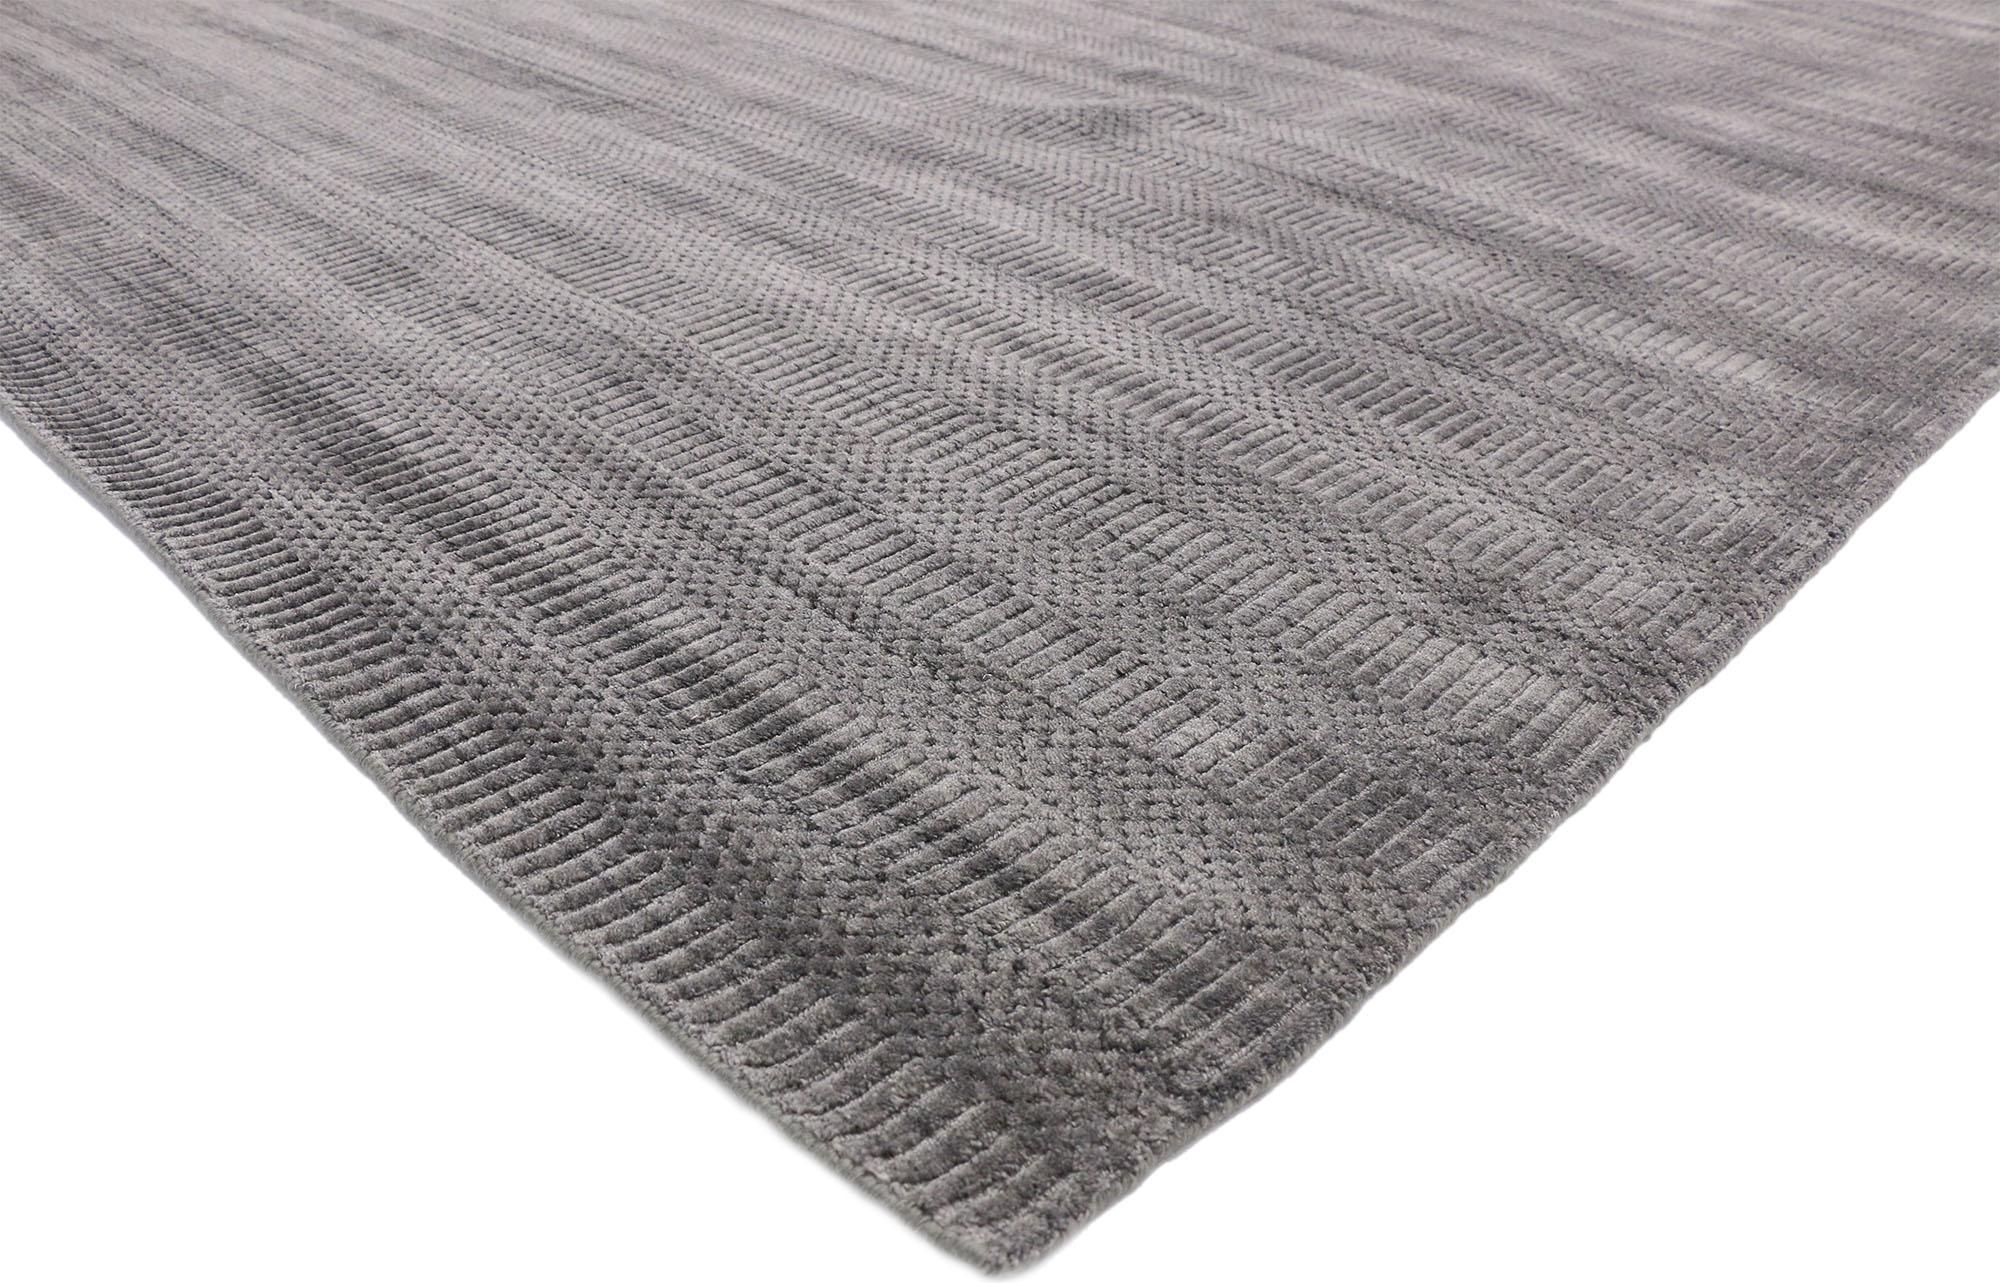 30439 New Transitional Gray Area Rug with Modern Danish Scandi Style. This transitional gray area rug emanates function and versatility with high style. Midcentury vibes meet Scandinavian design in this transitional gray area rug. The all-over